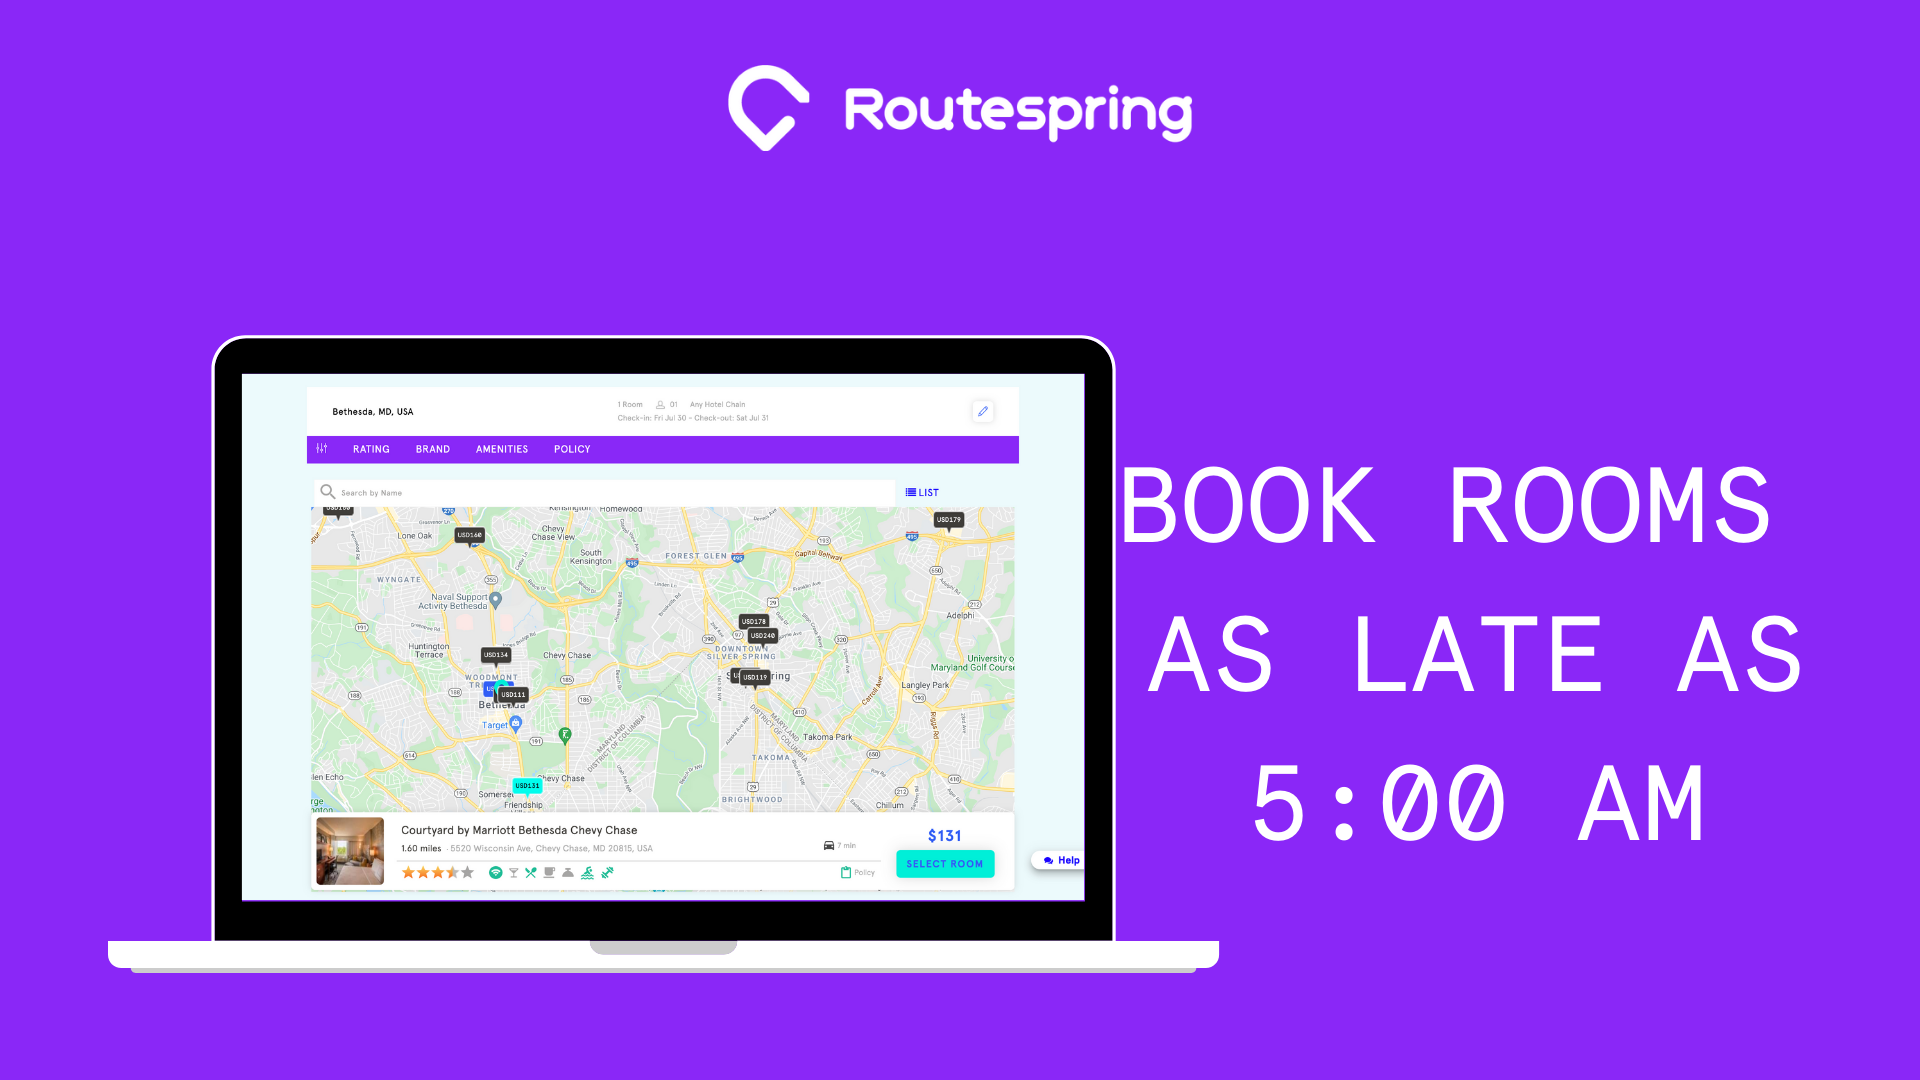 Routespring helps you book rooms as late as 5:00 AM